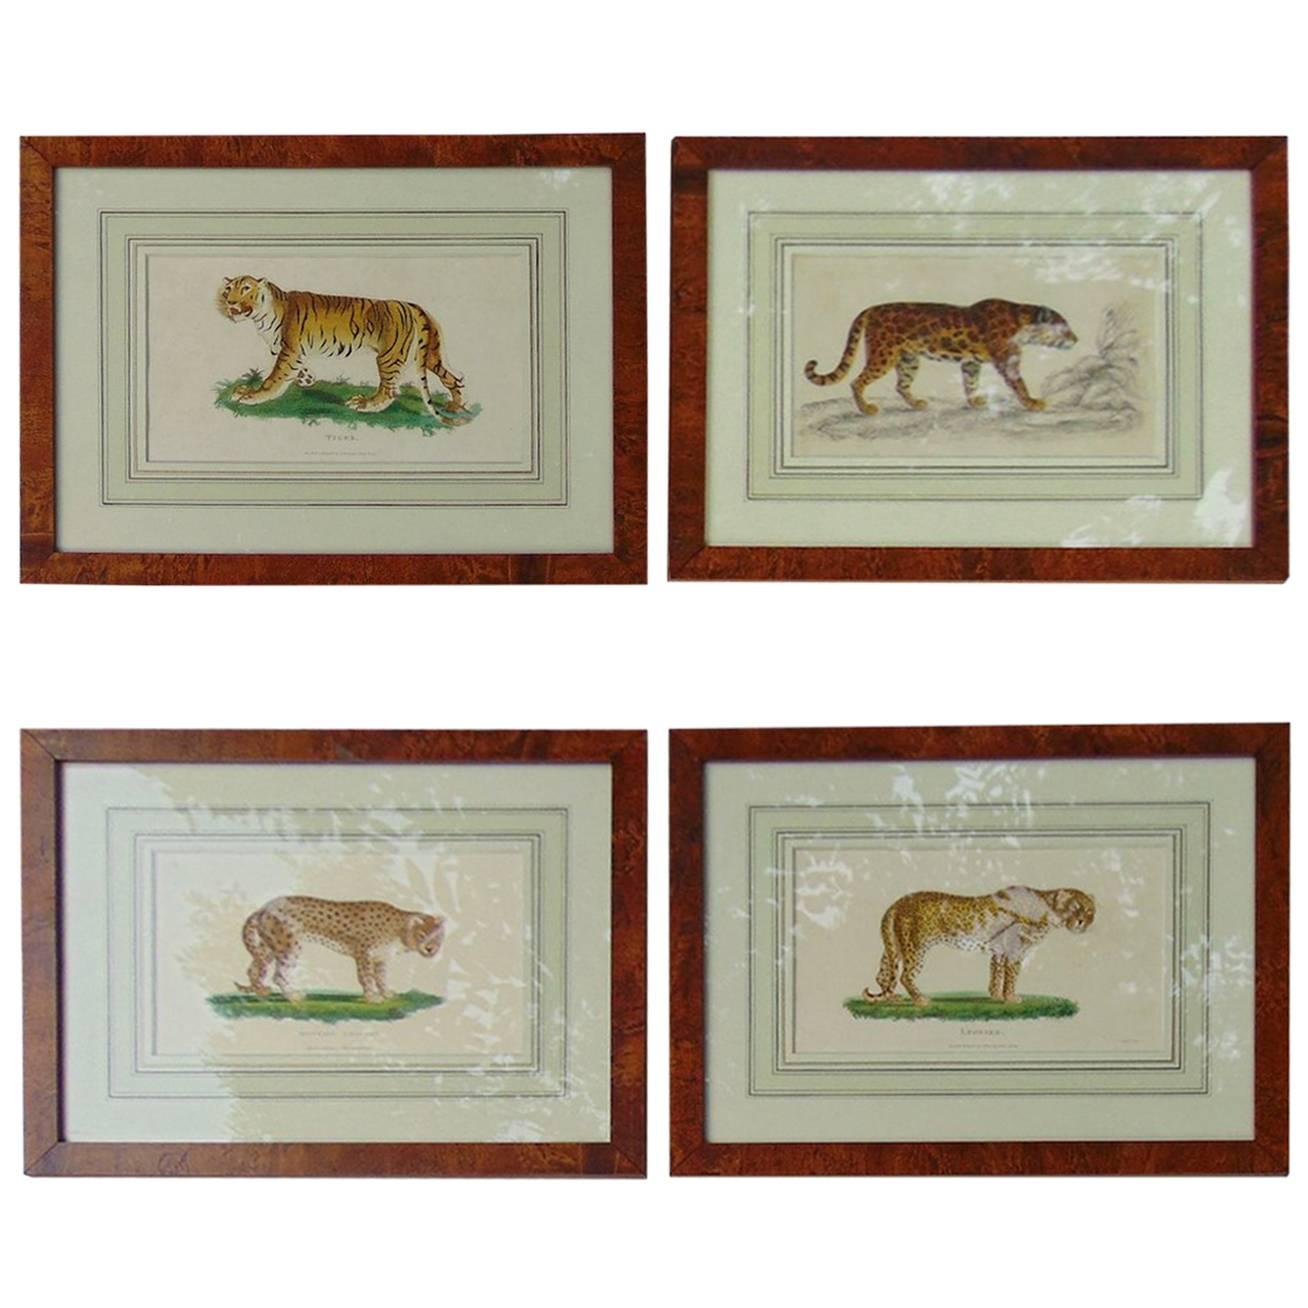 Four Framed Early 19th Century Engravings of Lions and Tigers